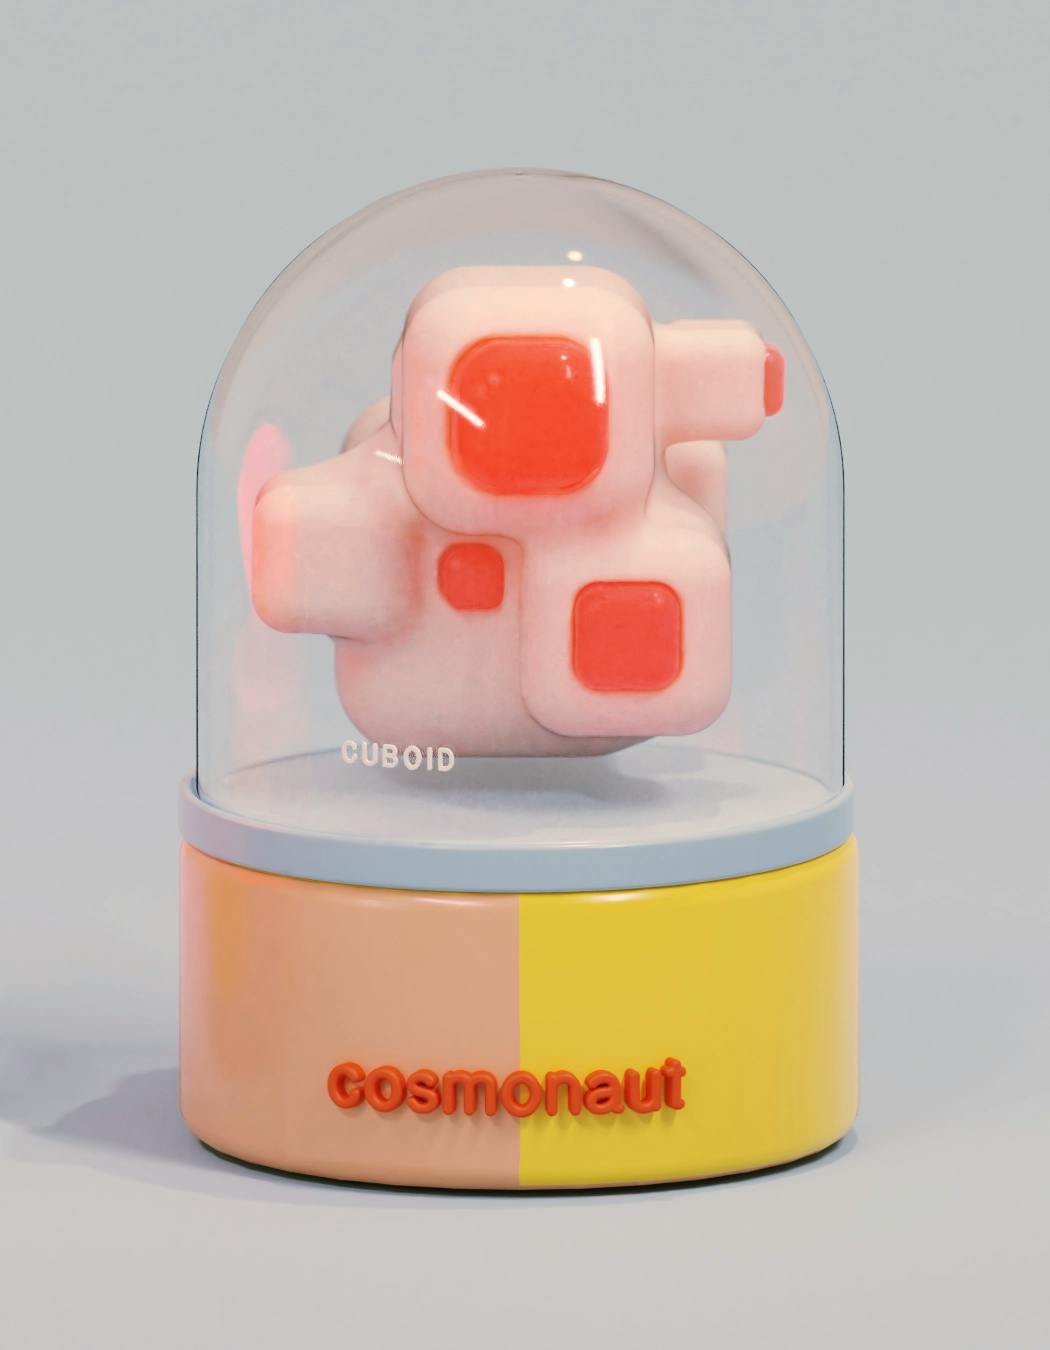 a strange form in the capsule is made up of rounded, matte cubes clumped together. some of these cubes have cubes within them, which are jelly-like in appearance. the label reads 'cuboid'.